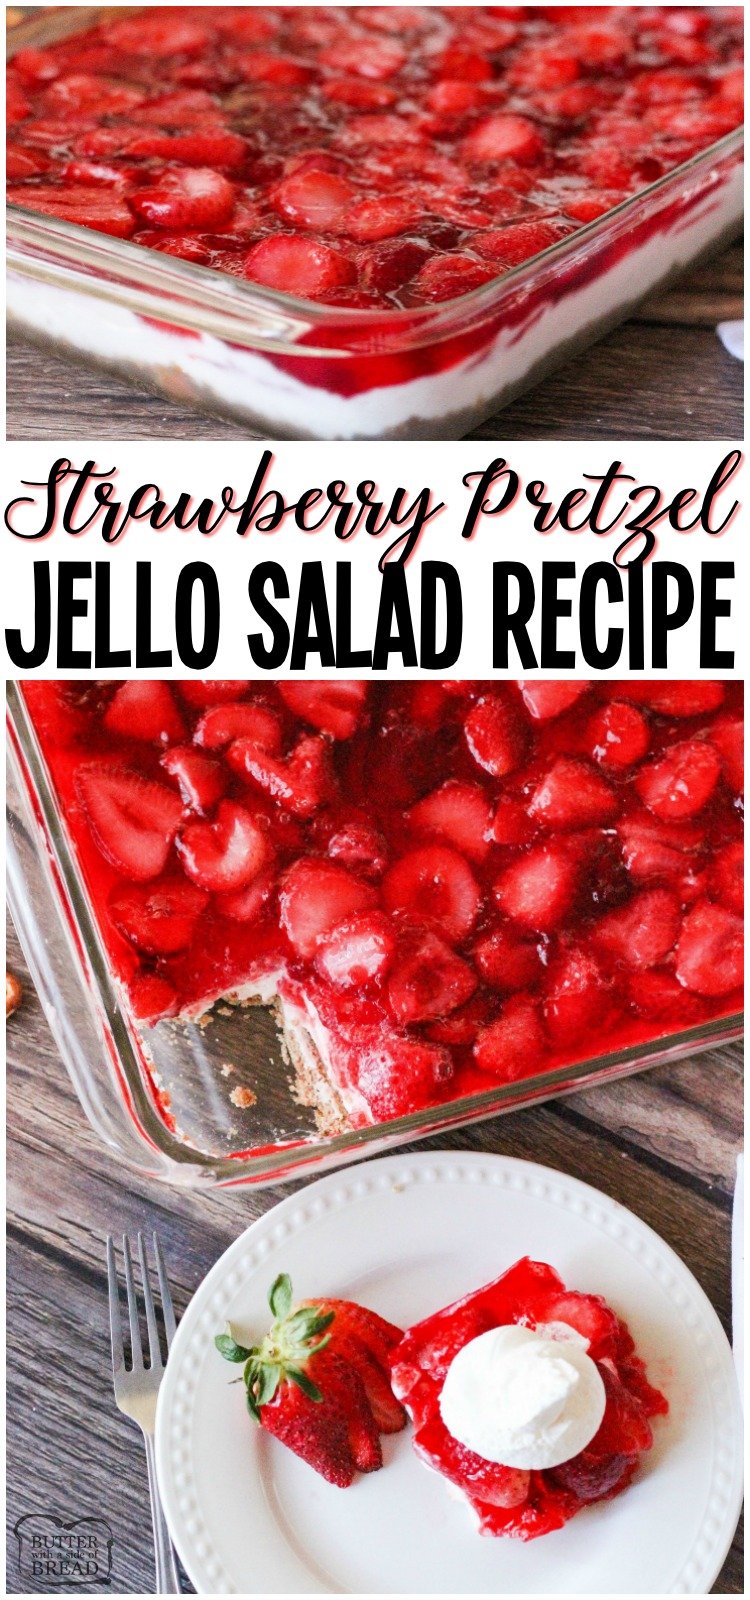 Gorgeous Strawberry Pretzel Salad layered with a buttery pretzel crust, cream cheese whipped topping, strawberries and jello. A simple sweet side dish that is always the first to go! #salad #strawberry #jello #pretzel #strawberries #potluck #recipe from BUTTER WITH A SIDE OF BREAD